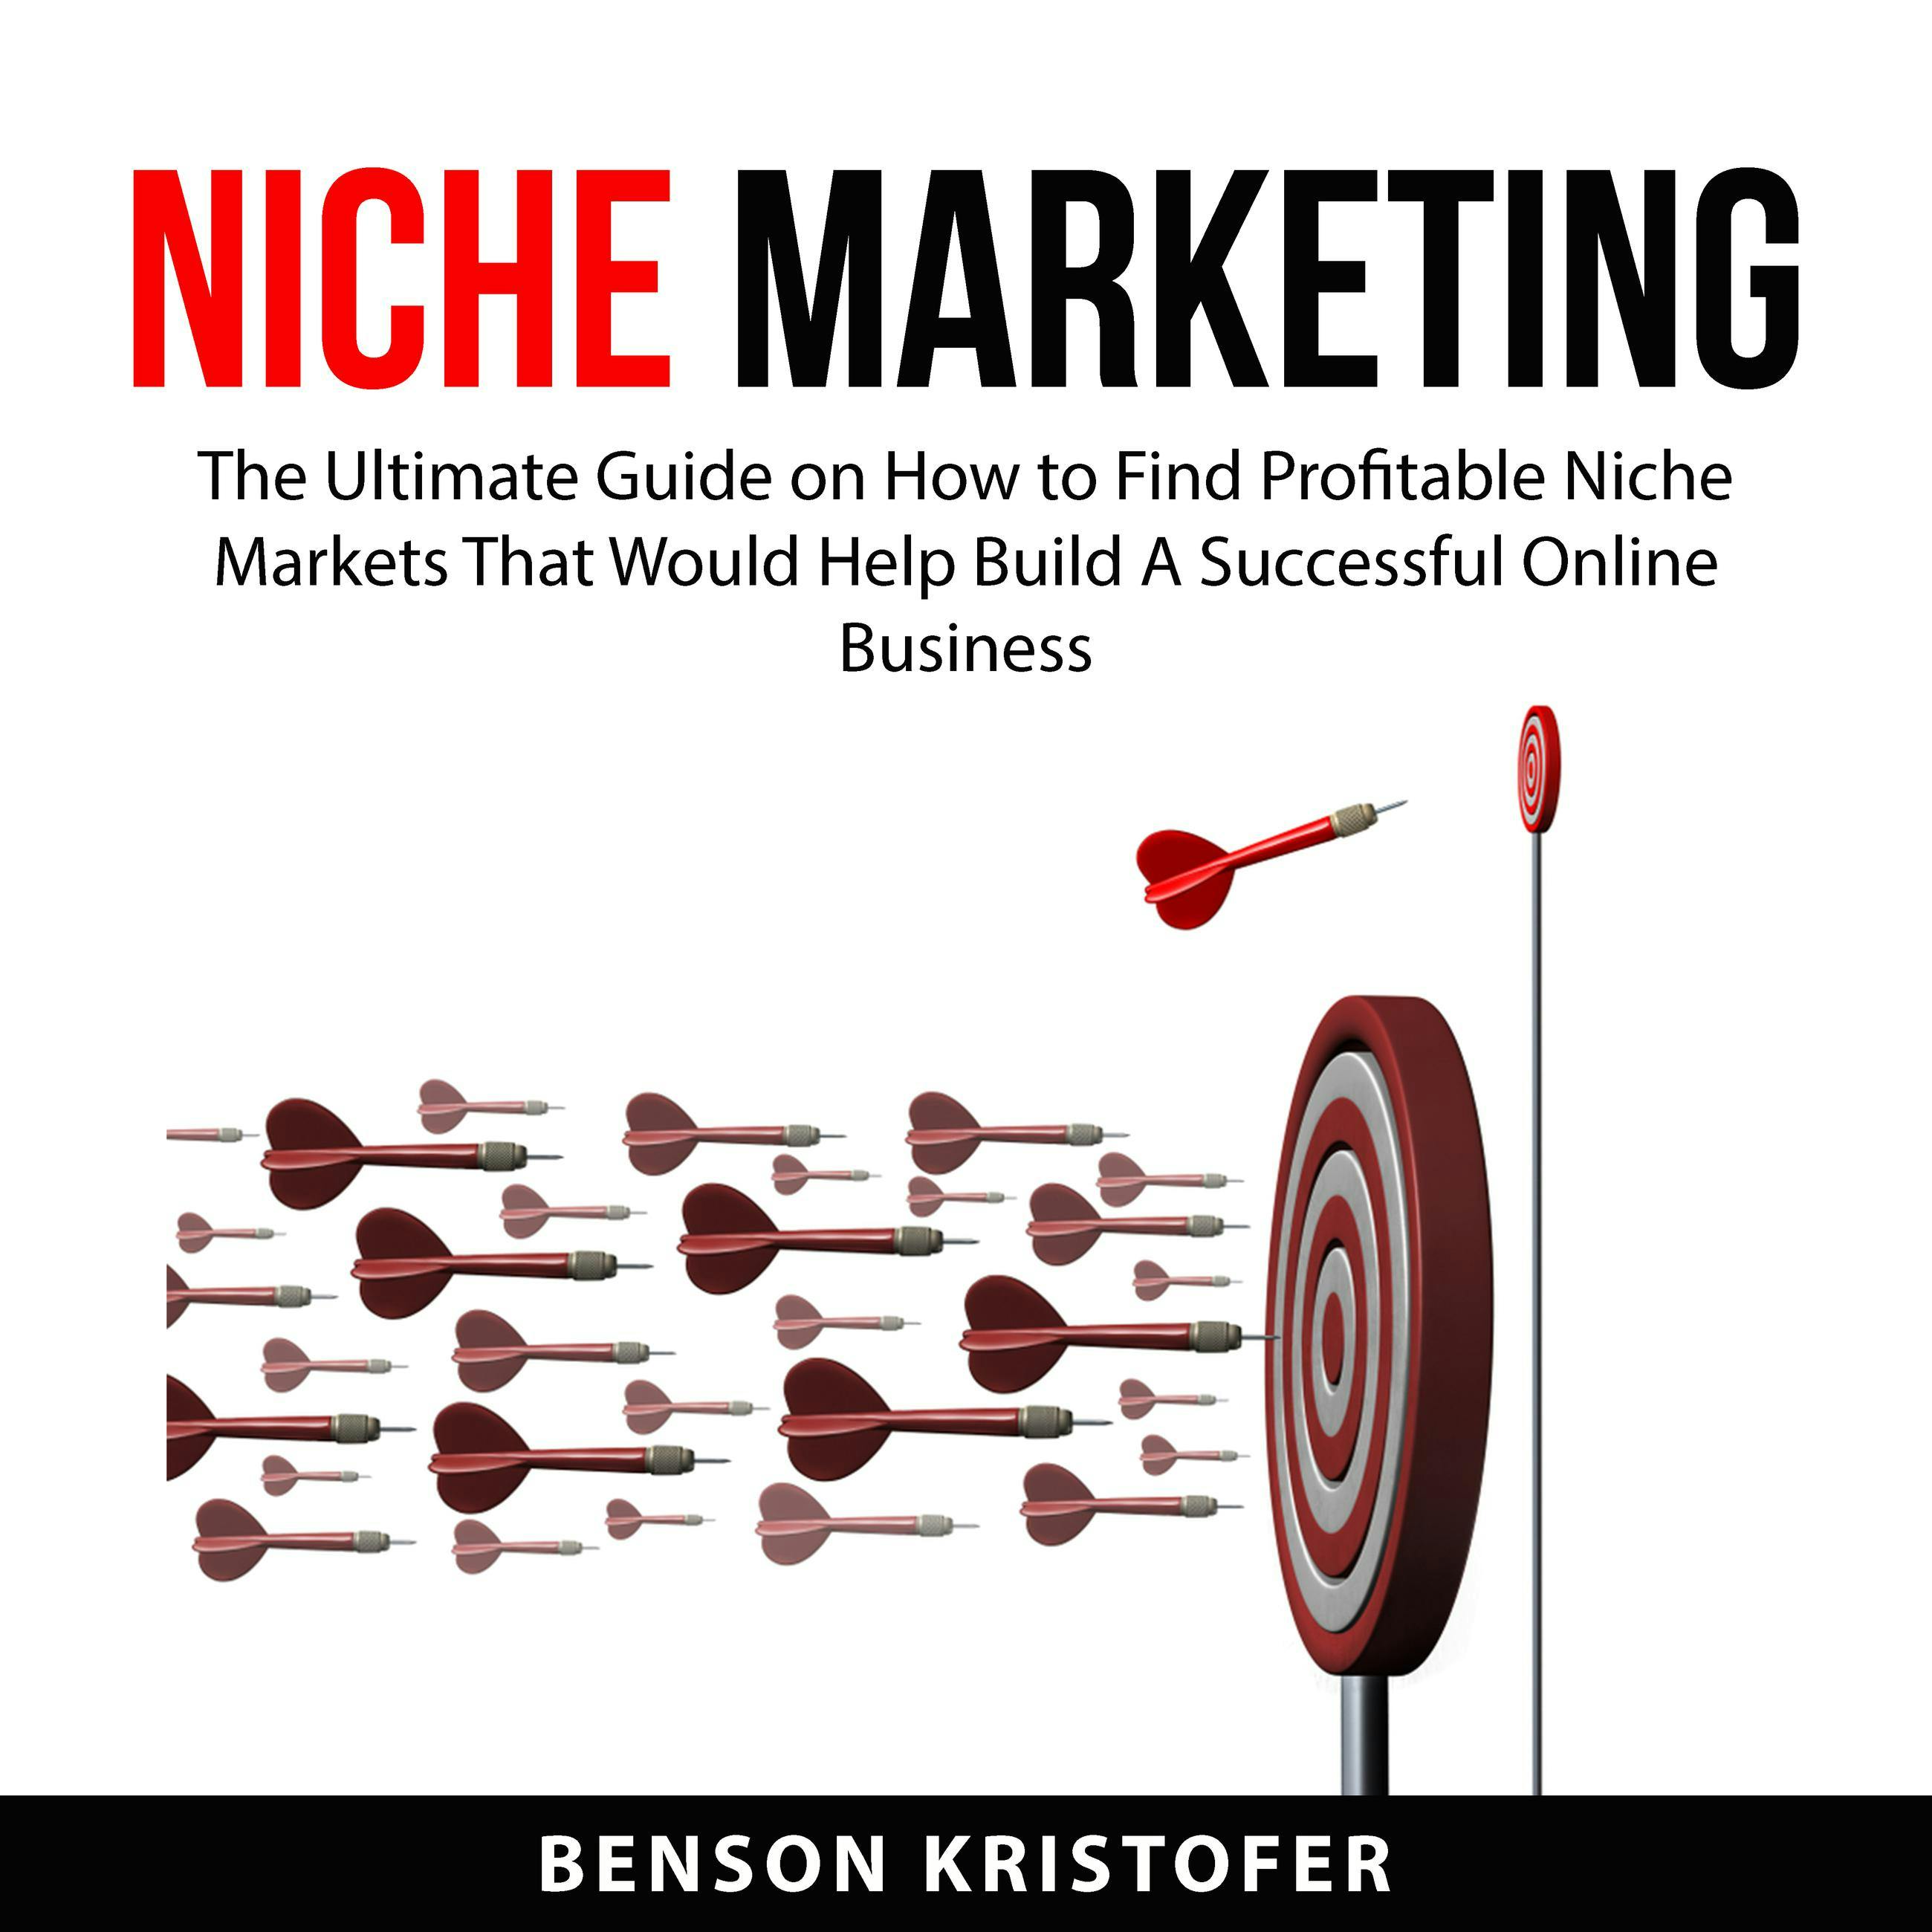 Niche Marketing: The Ultimate Guide on How to Find Profitable Niche Markets That Would Help Build A Successful Online Business - Benson Kristofer